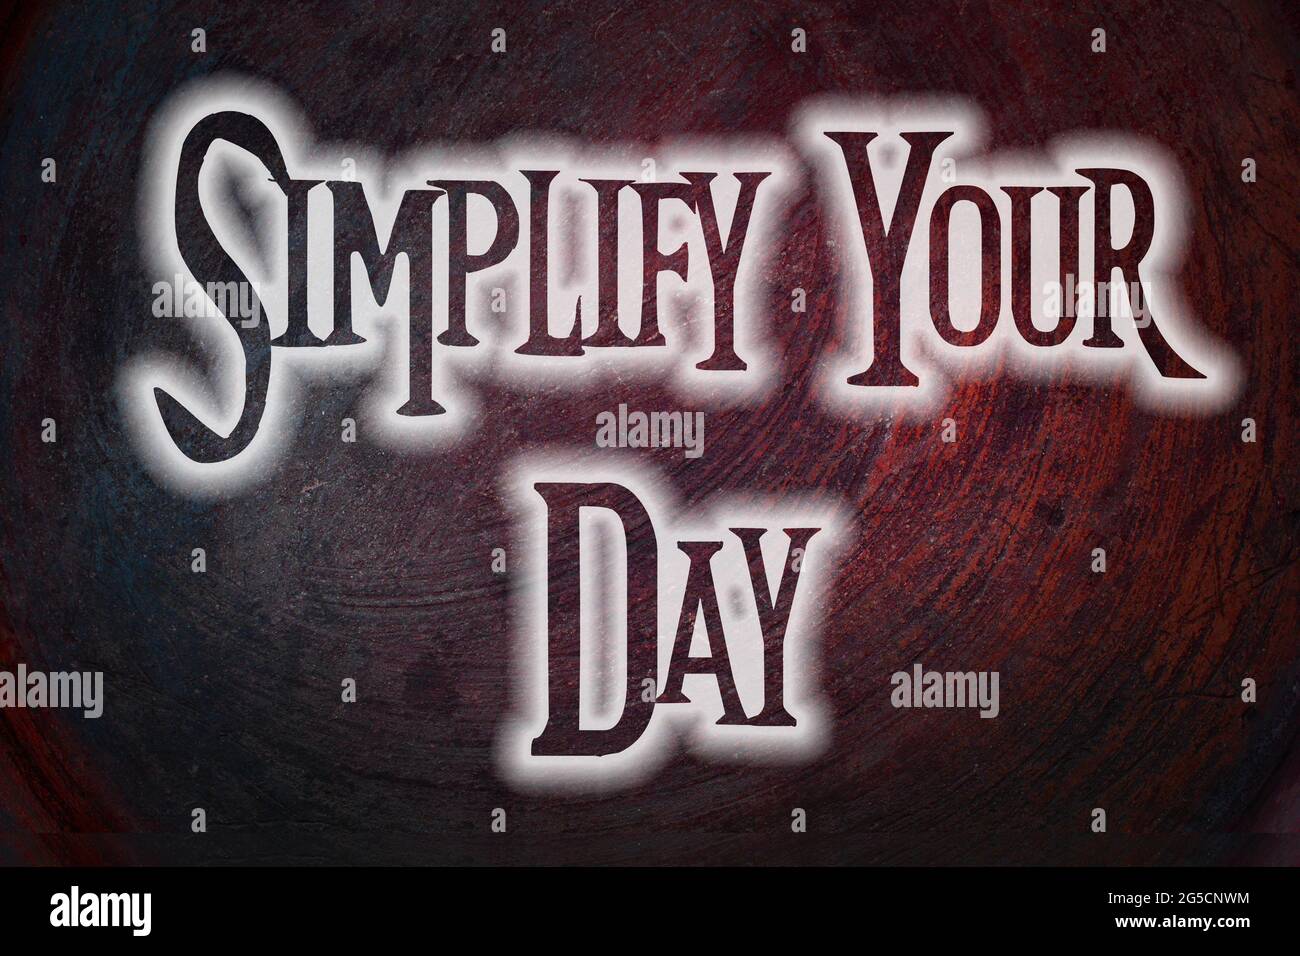 Simplify Your Day Concept text on background Stock Photo